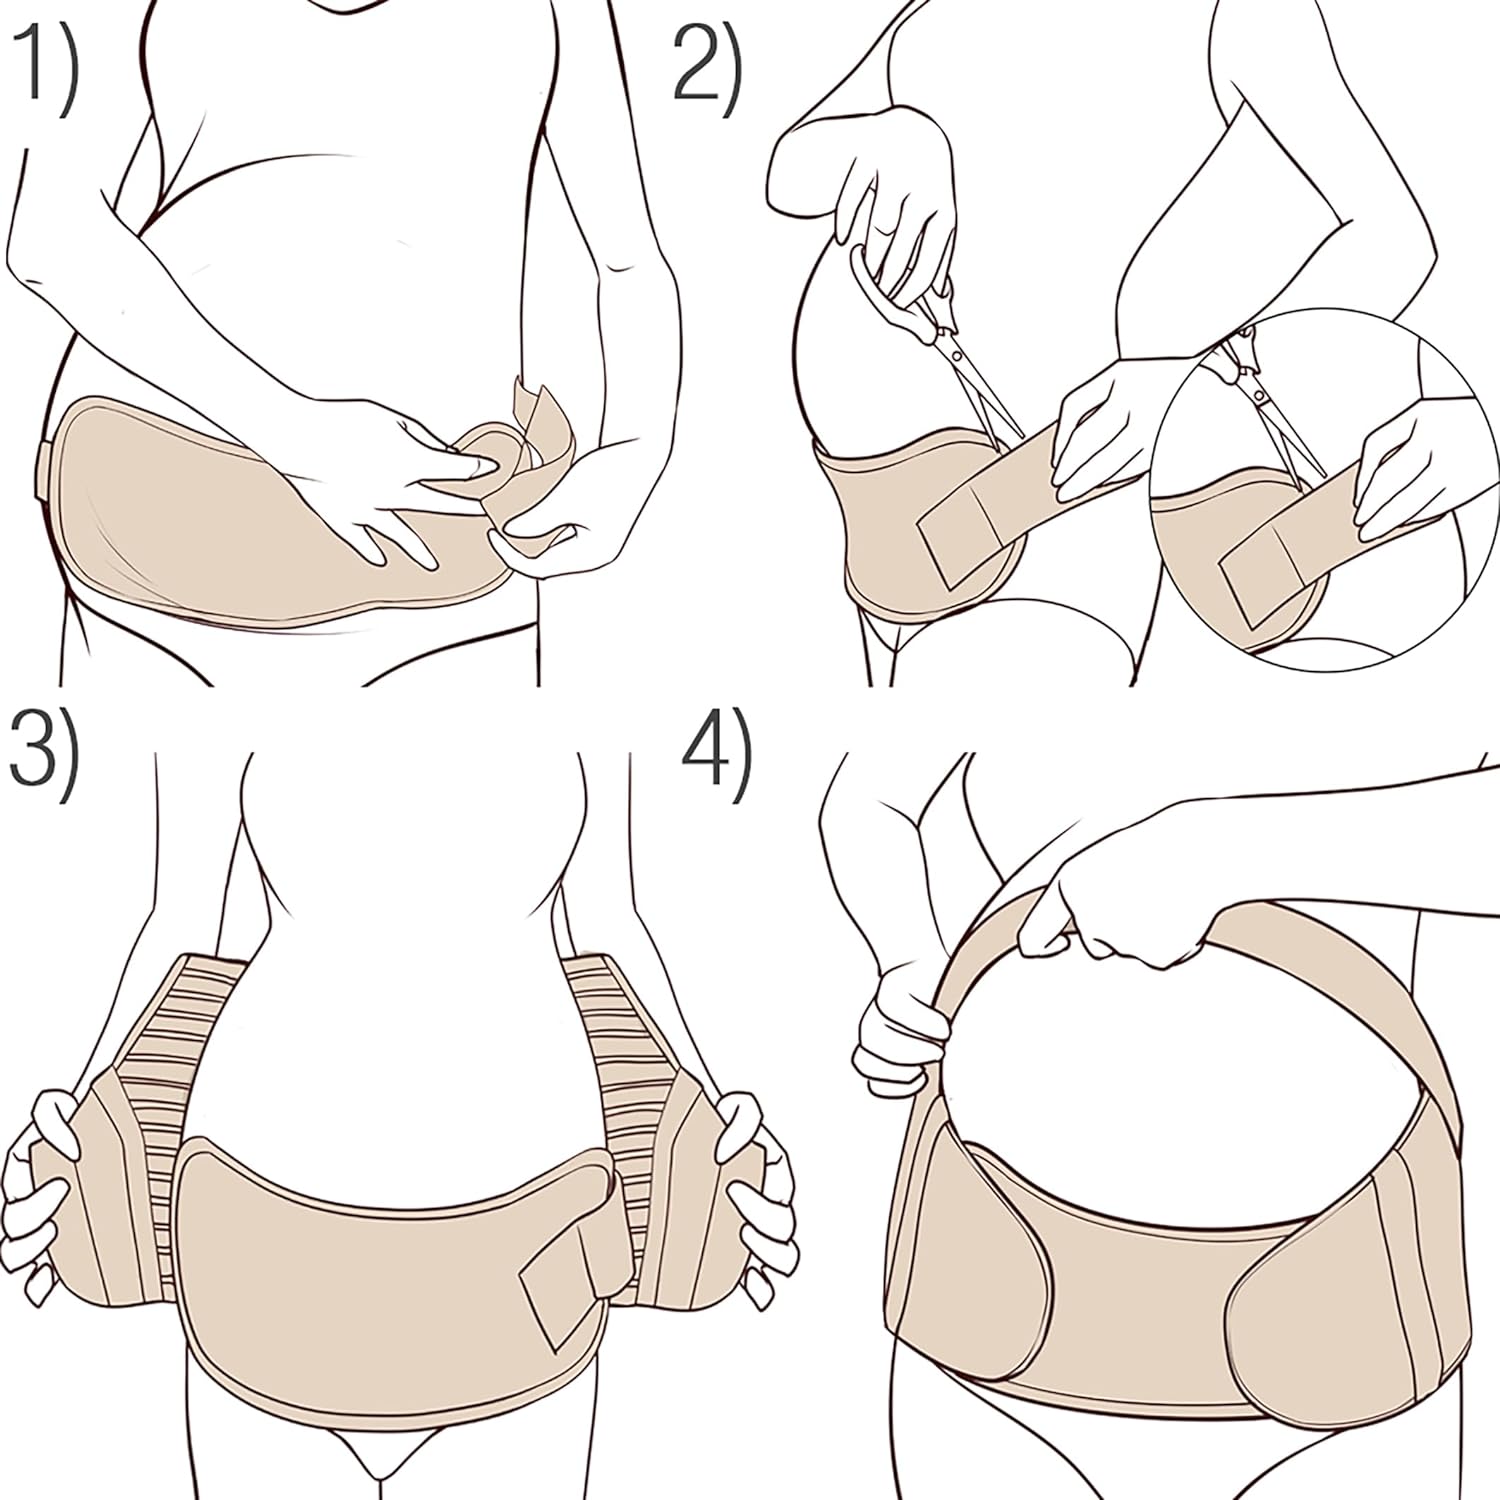 Maternity Belly Band